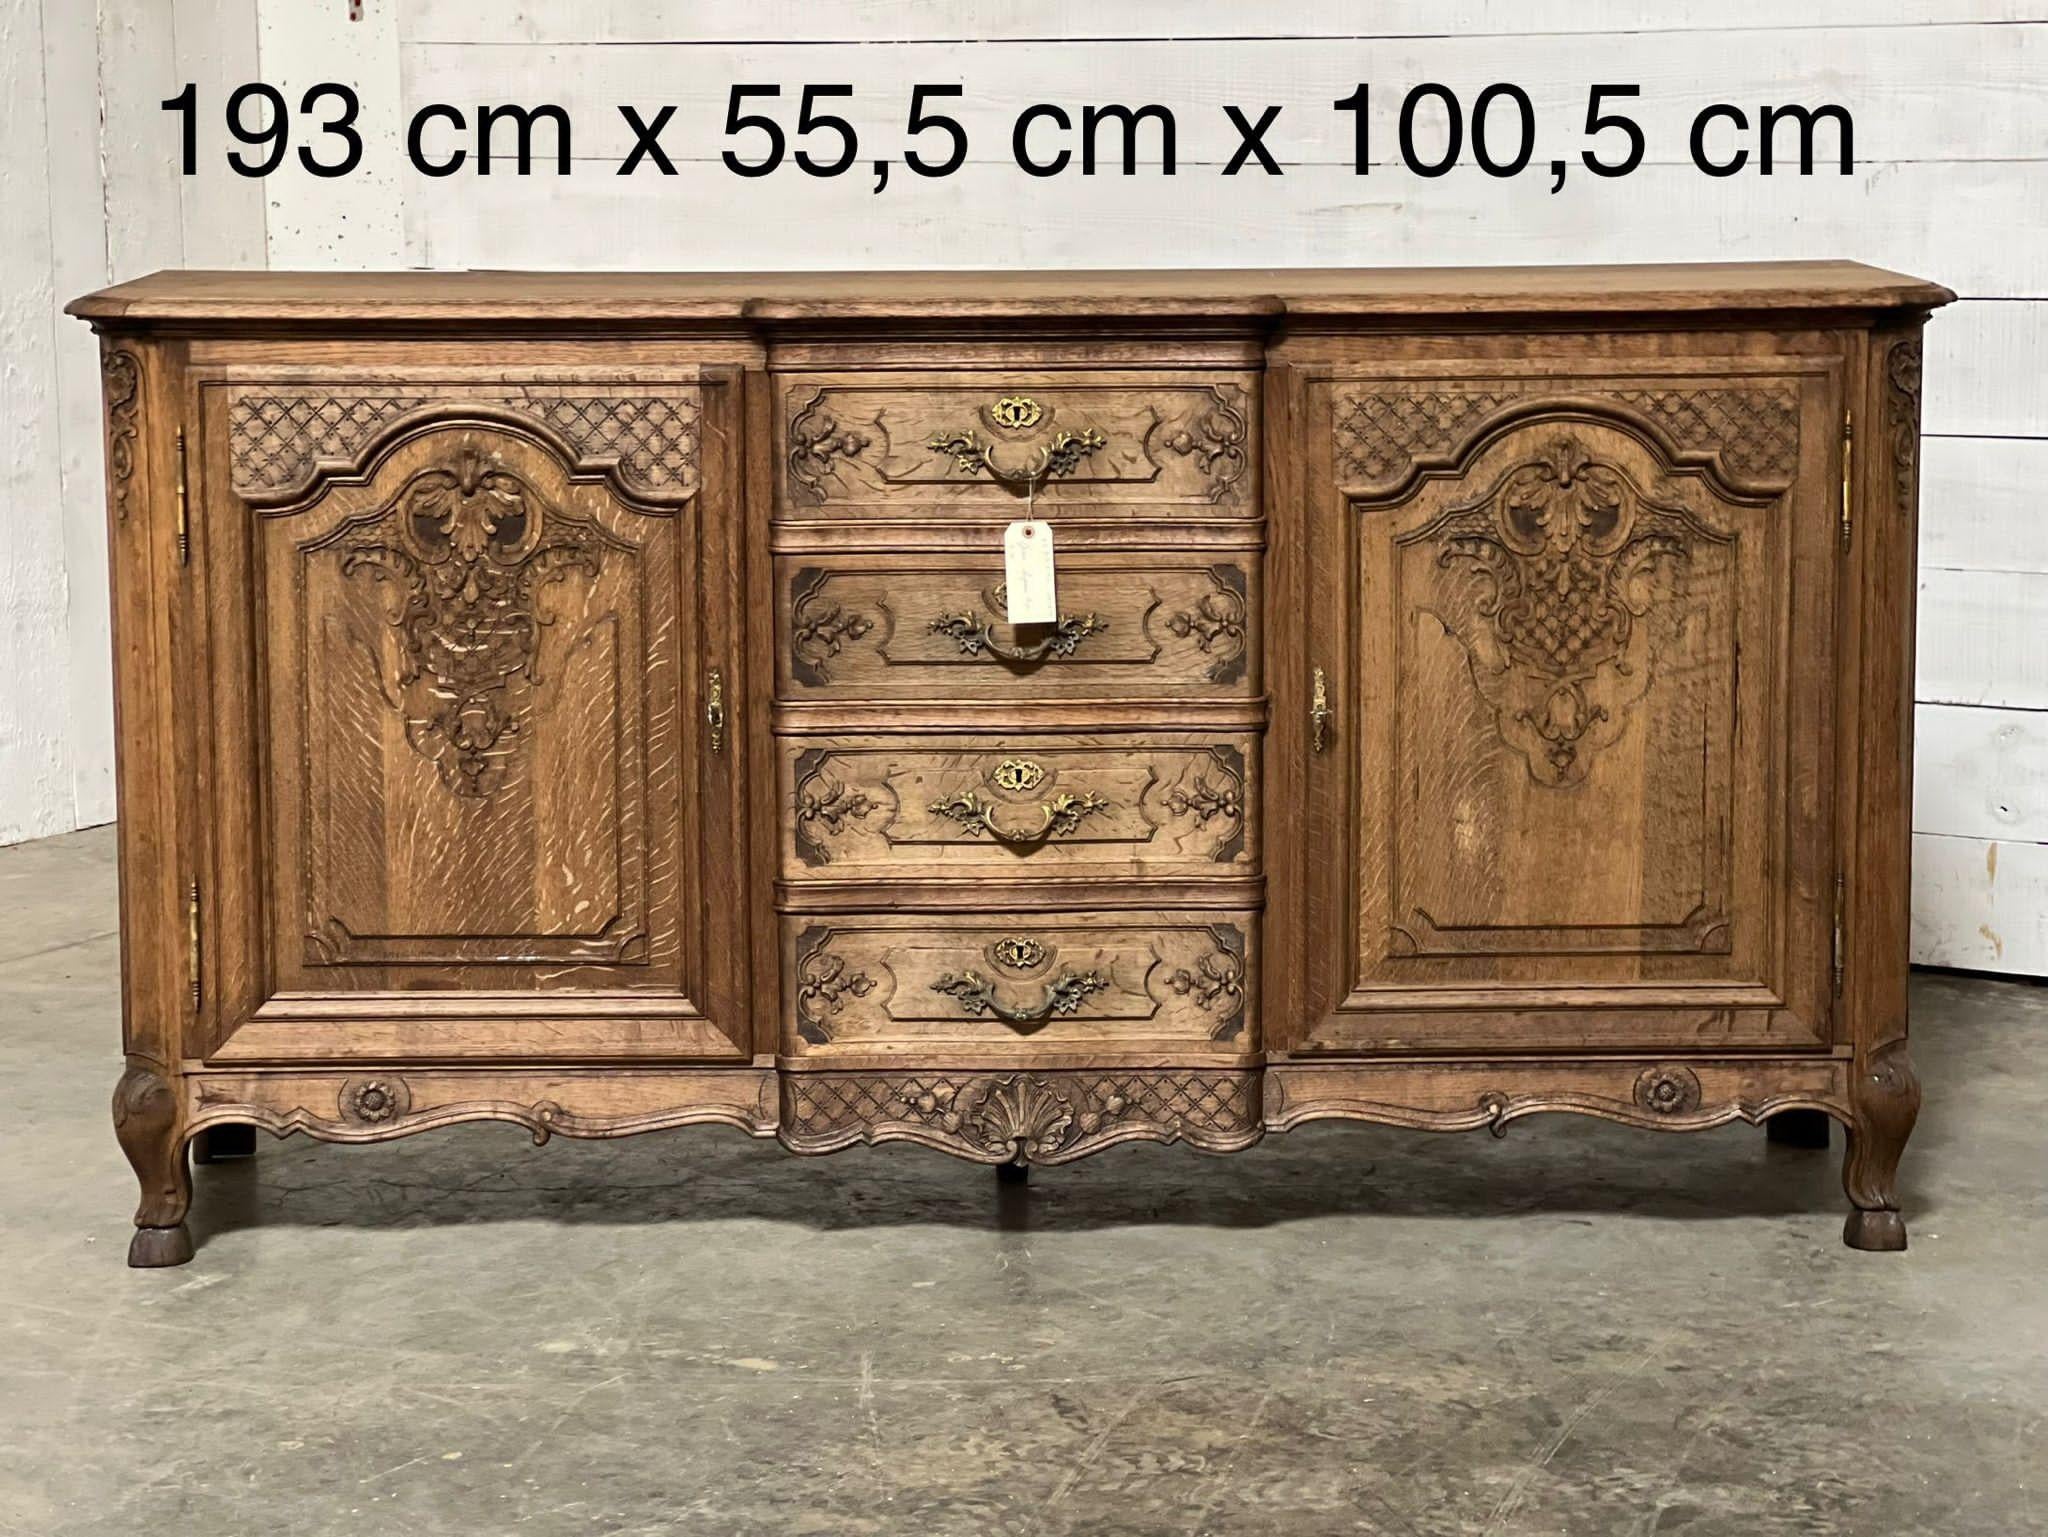 This is a really nice looking and very practical French sideboard or enfilade, made from oak and dating to around 1900 and of excellent quality construction. The drawers all run smoothly and its in excellent original condition for the home. We have